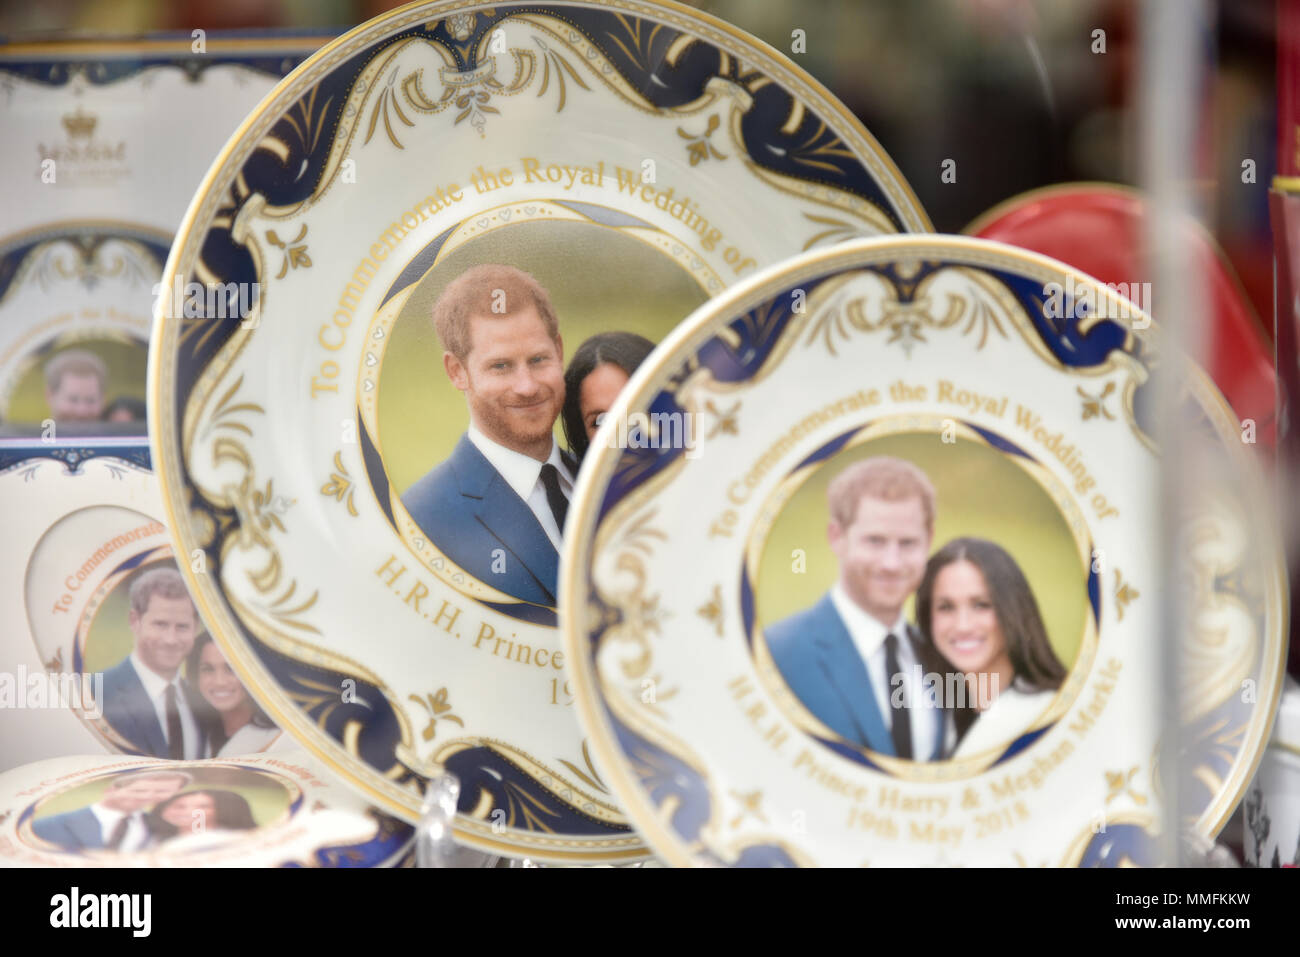 London, UK. 11th May 2018. Gift shops in London selling Royal Wedding merchandise for the wedding of Meghan Markle and Prince Harry. Credit: Matthew Chattle/Alamy Live News Stock Photo